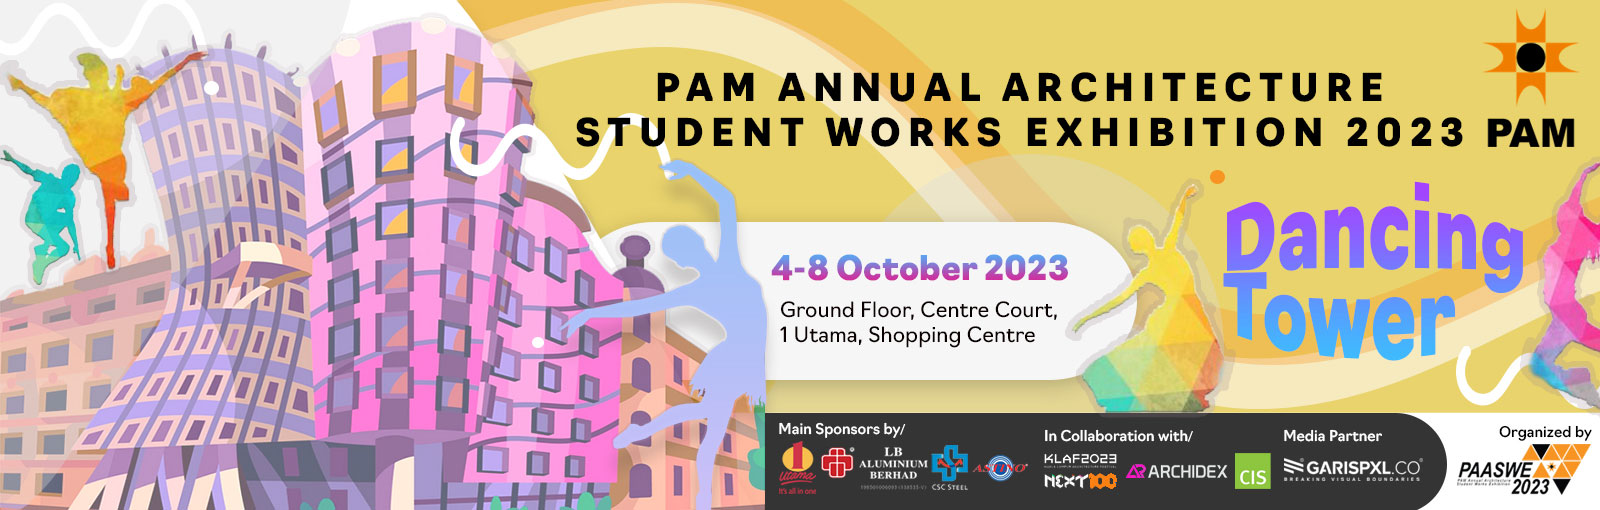 PAM Annual Architecture Student Works Exhibition 2023 (PAASWE 2023)